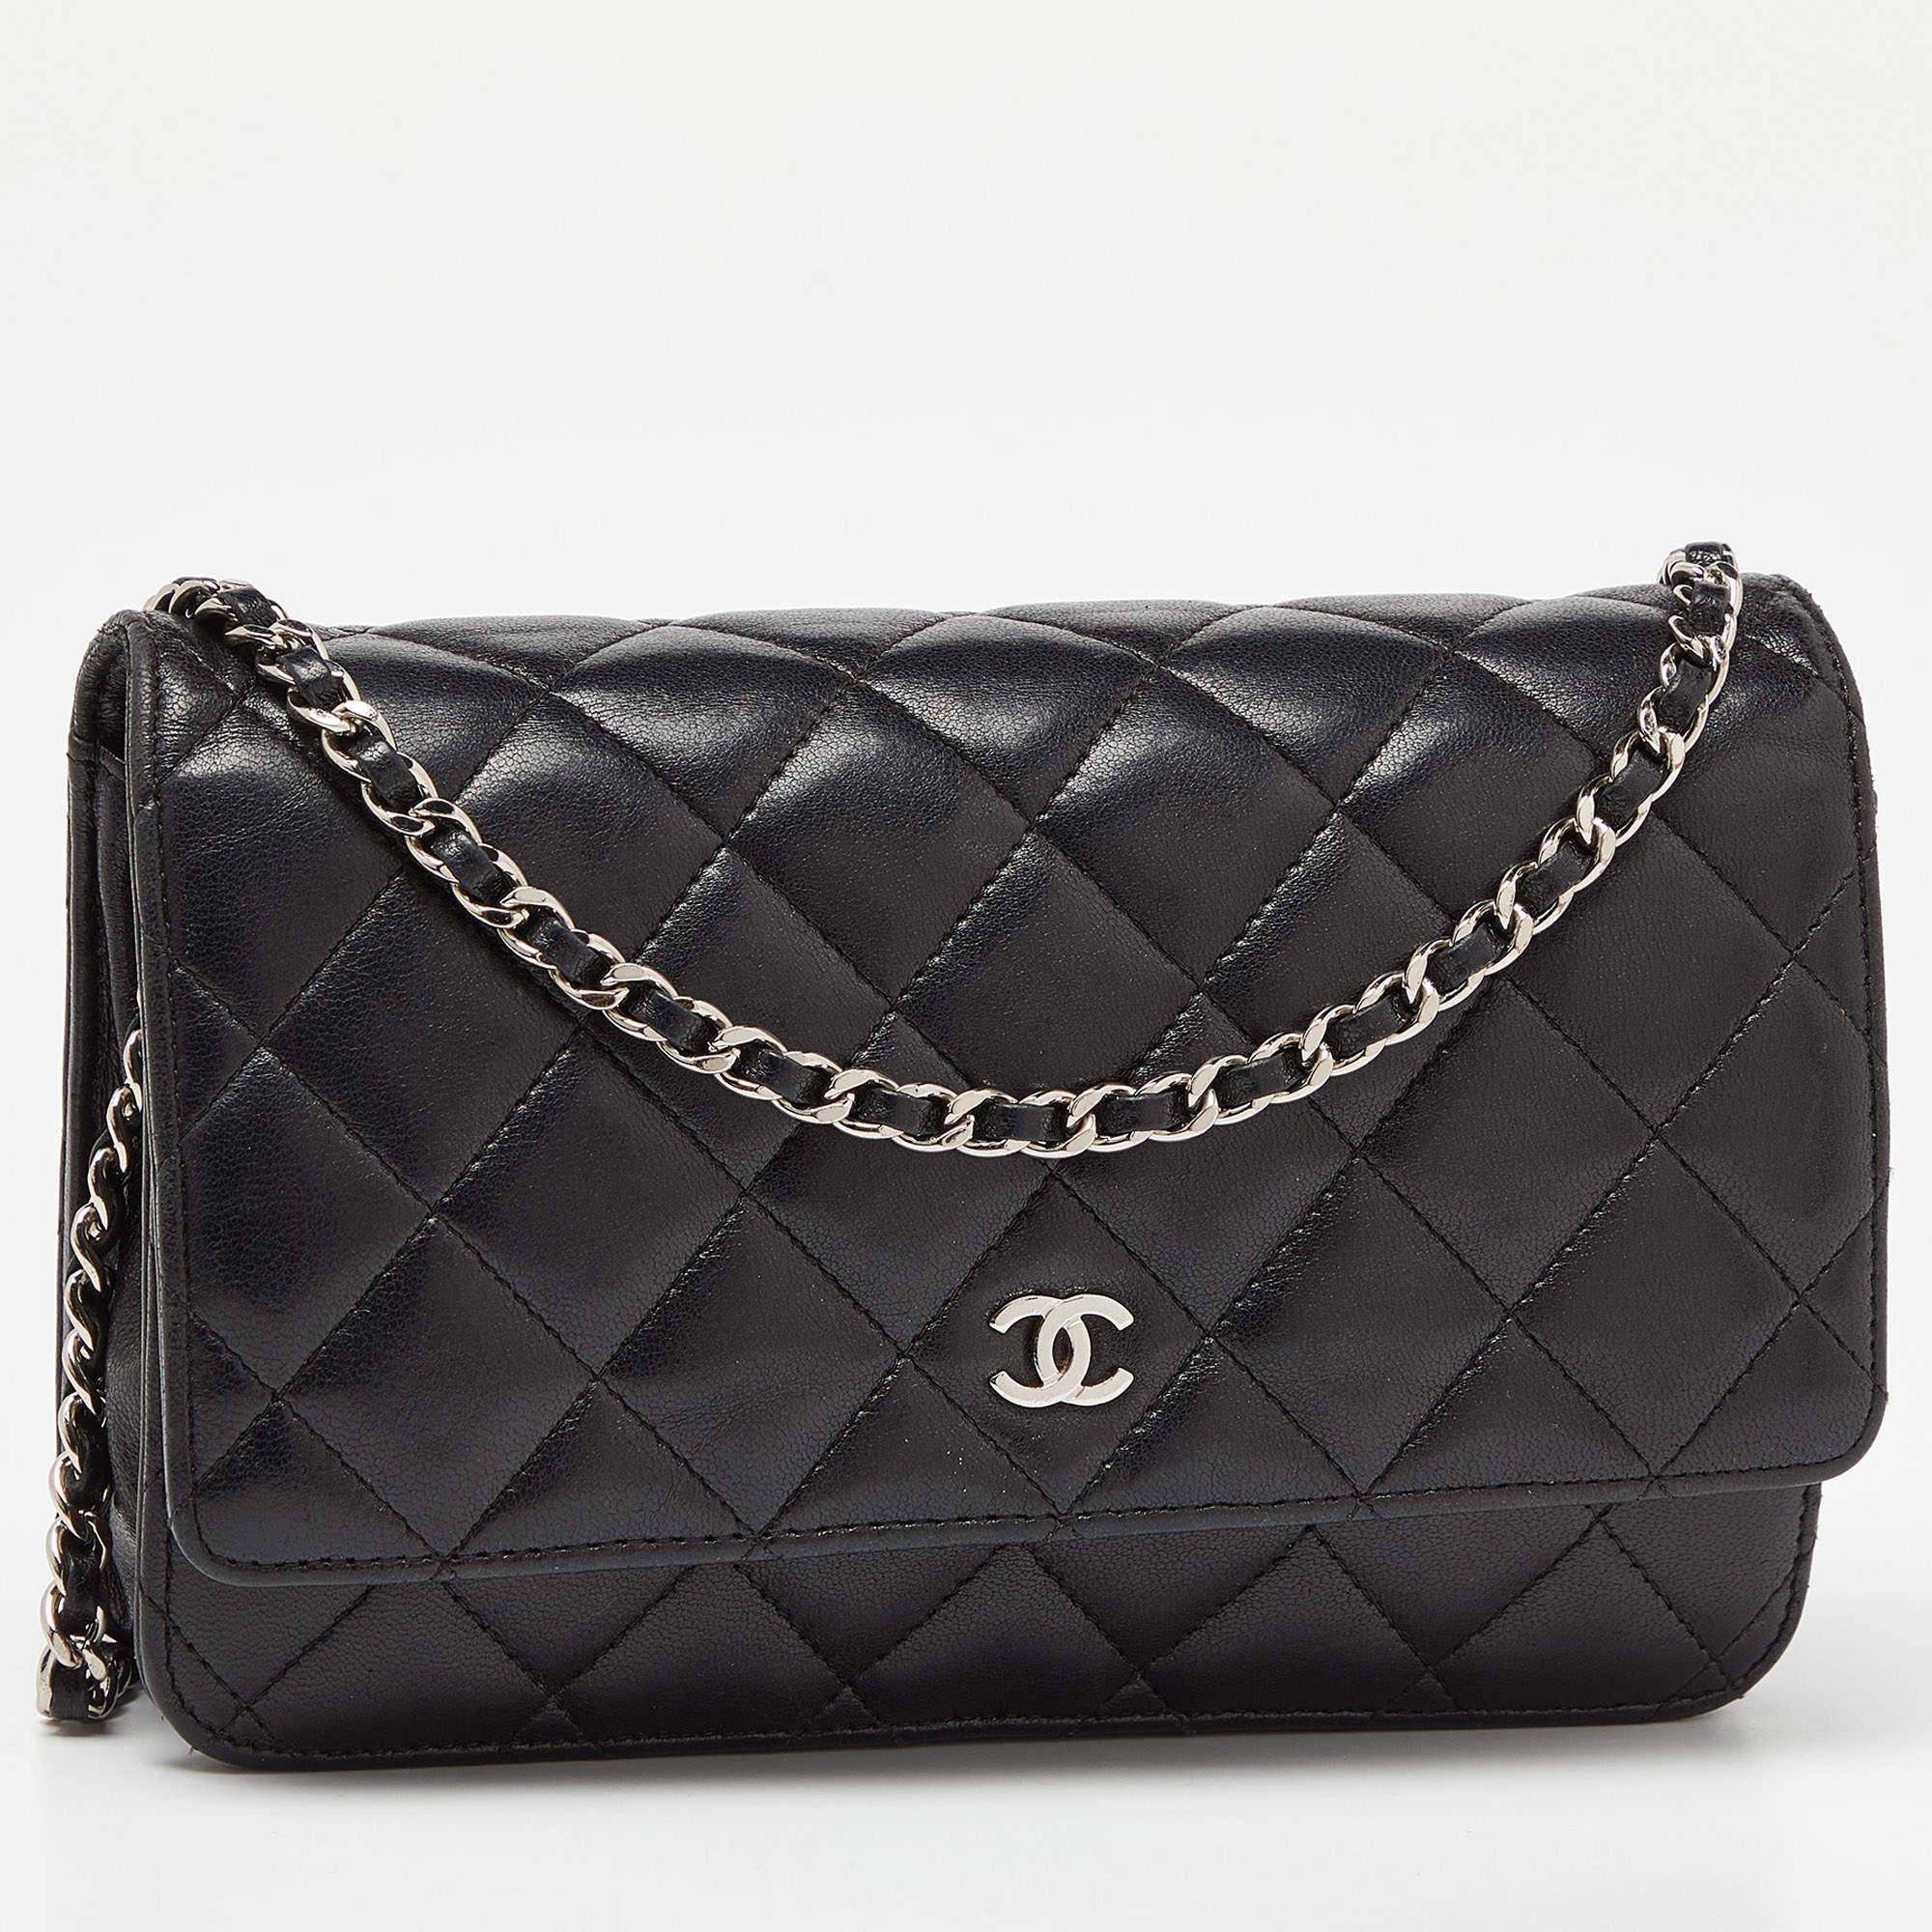 Women's Chanel Black Quilted Leather O Mini Wallet on Chain